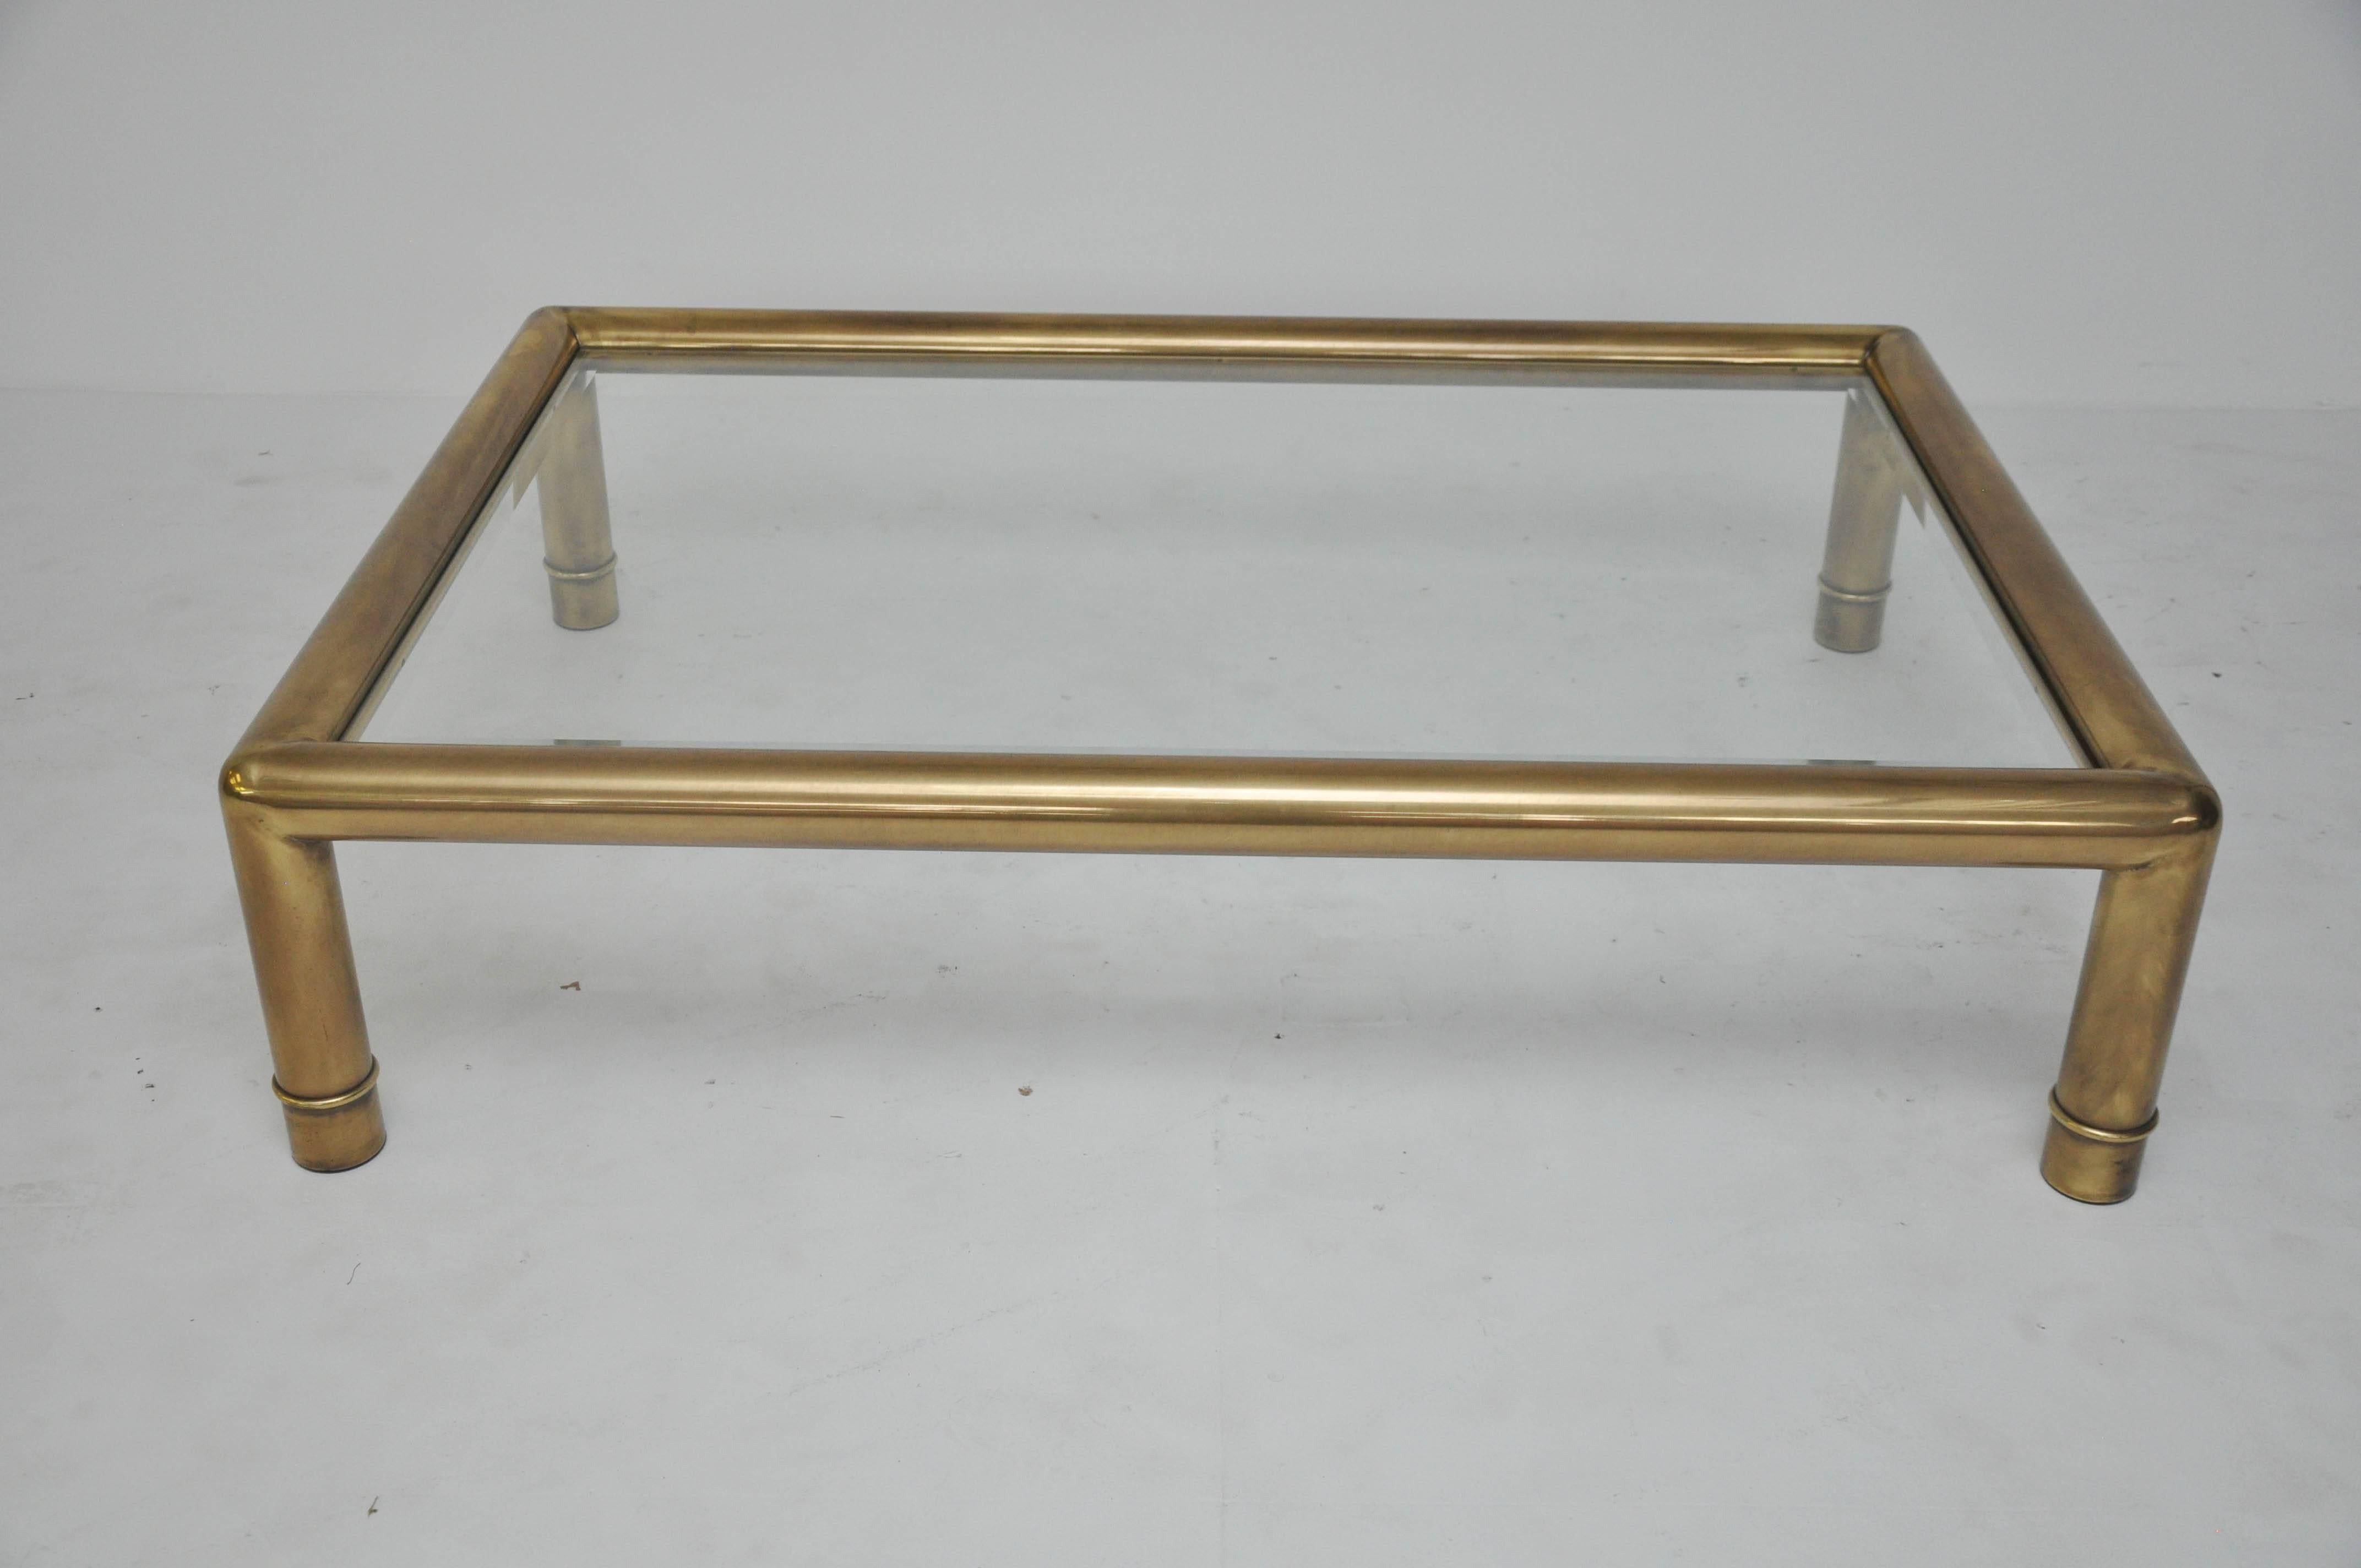 Brass frame coffee table with glass top by Mastercraft.